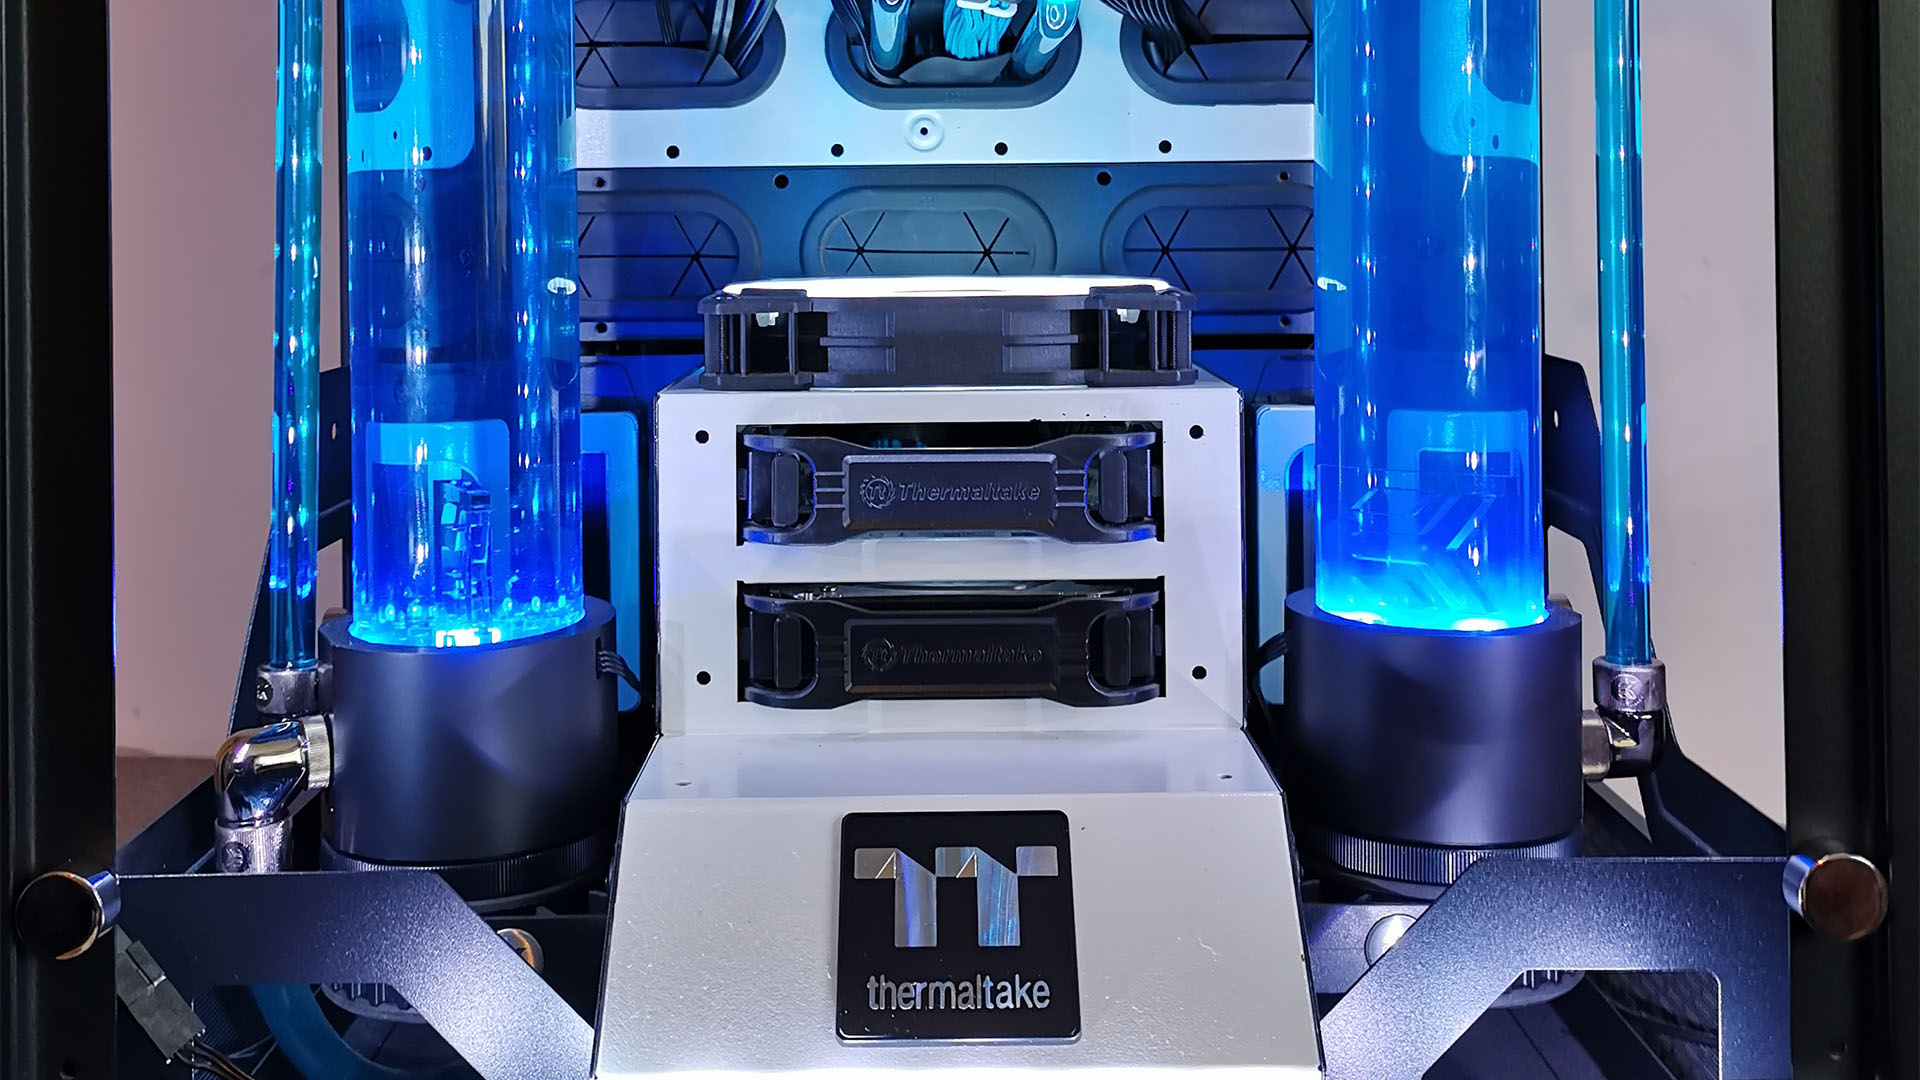 The resevoirs of the watercooled gaming Pc inside the Thermaltake 900 case